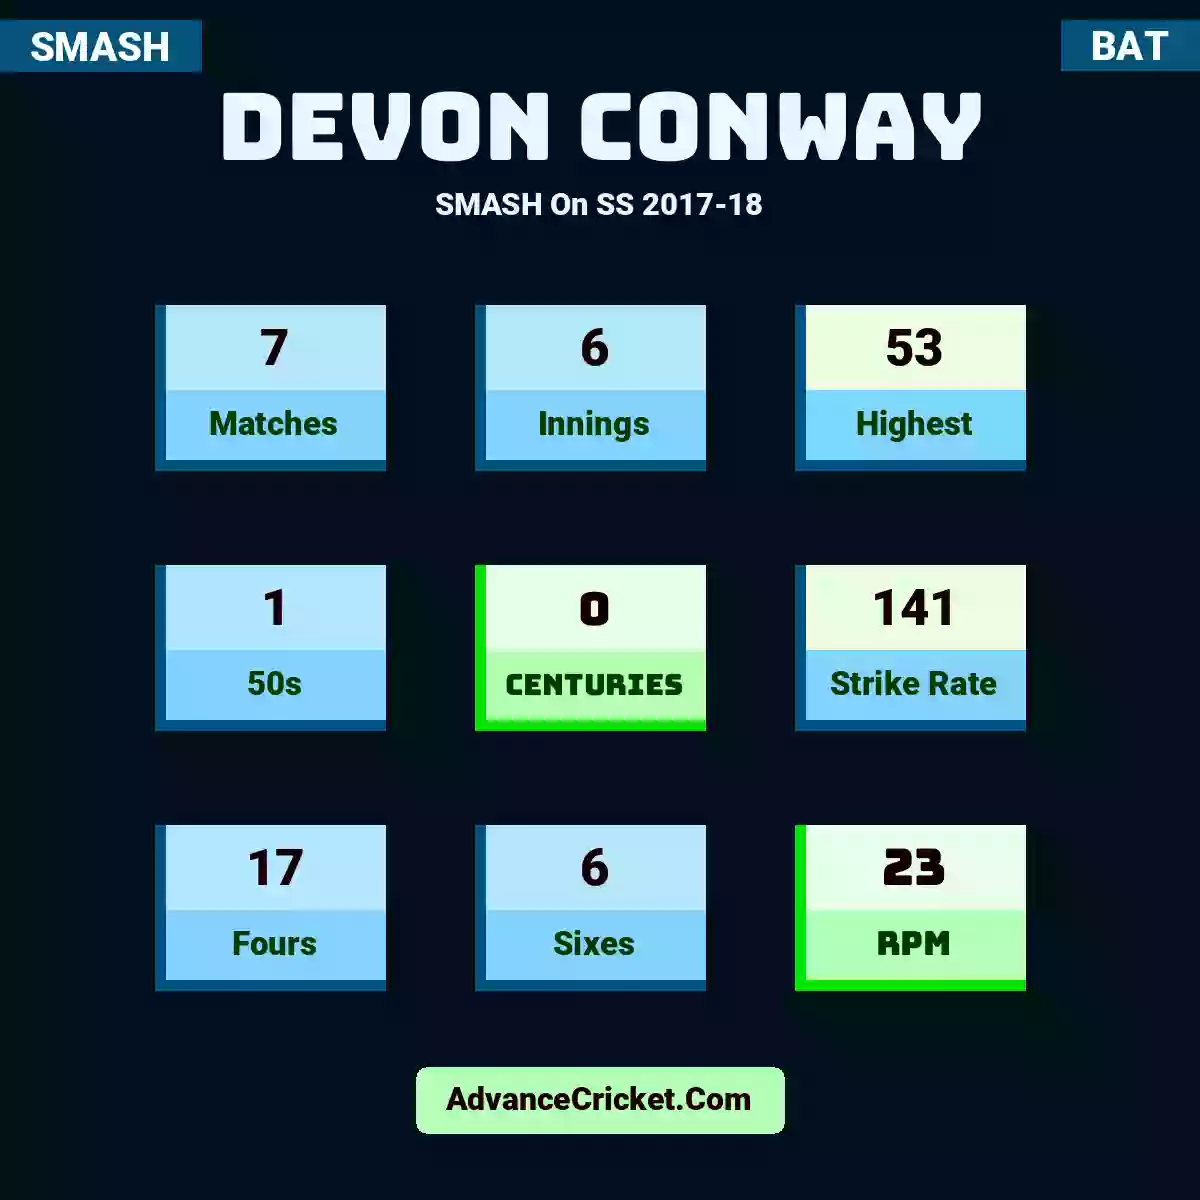 Devon Conway SMASH  On SS 2017-18, Devon Conway played 7 matches, scored 53 runs as highest, 1 half-centuries, and 0 centuries, with a strike rate of 141. D.Conway hit 17 fours and 6 sixes, with an RPM of 23.